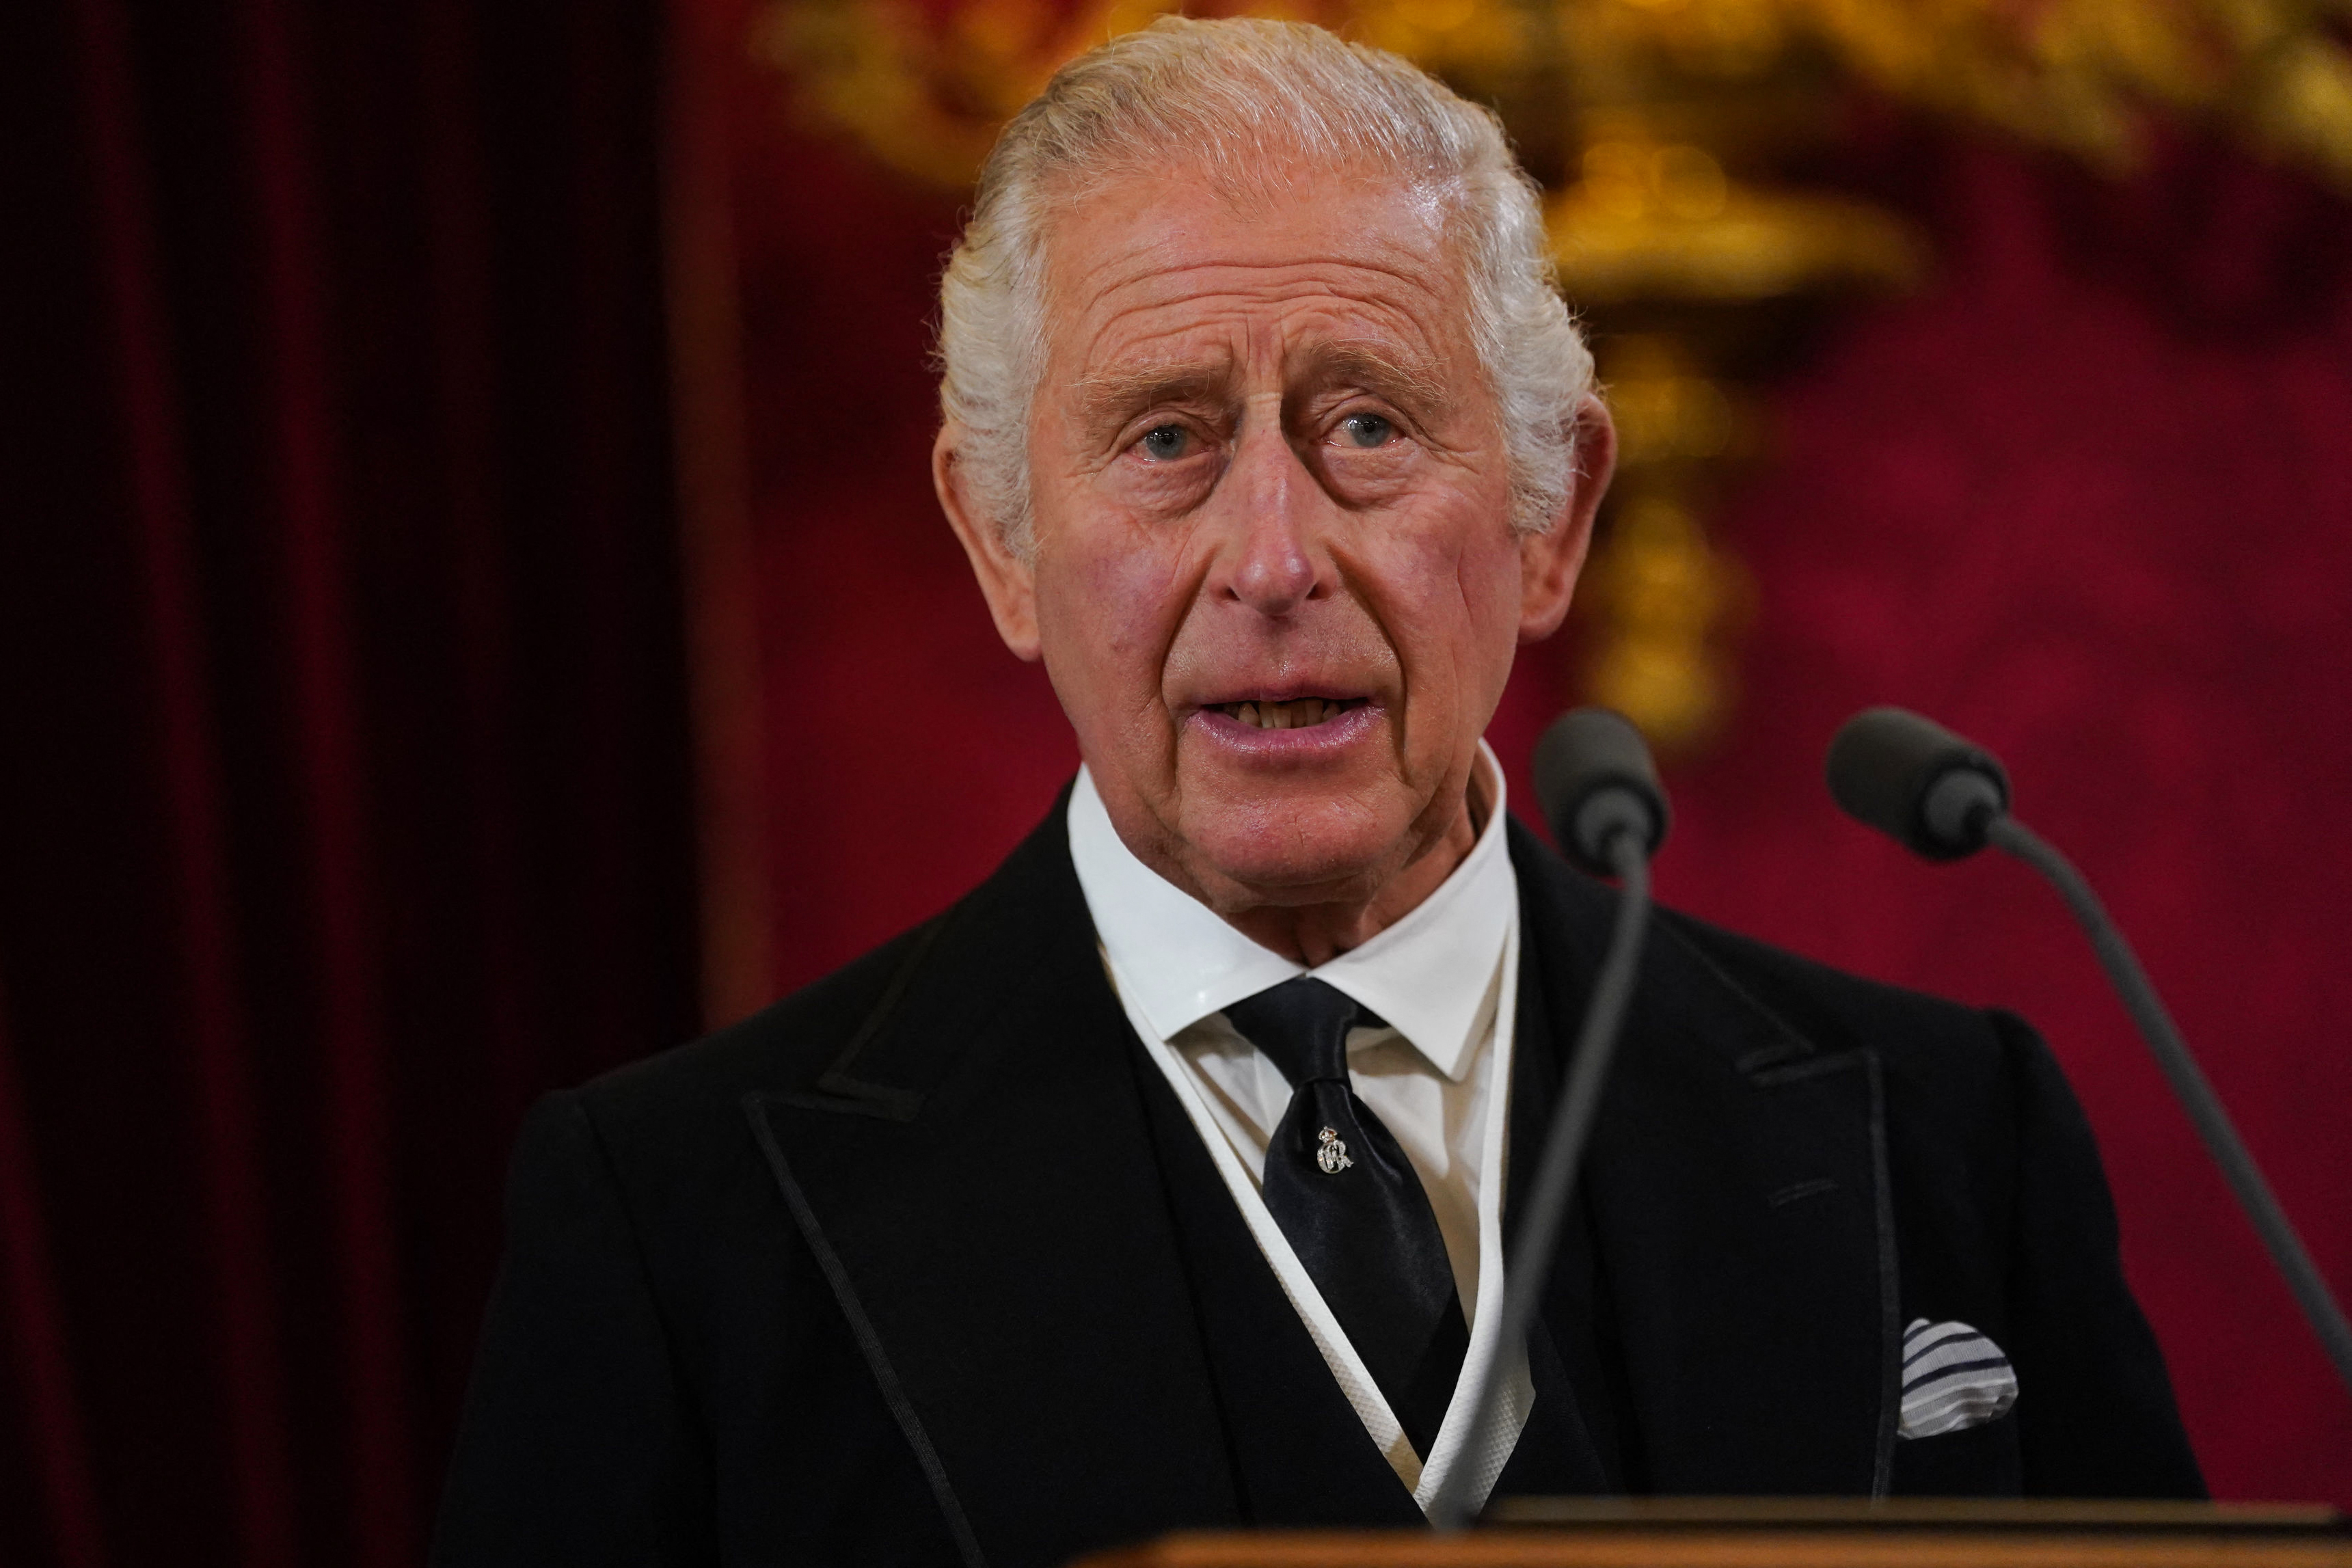 King Charles 'doing well' after prostate treatment